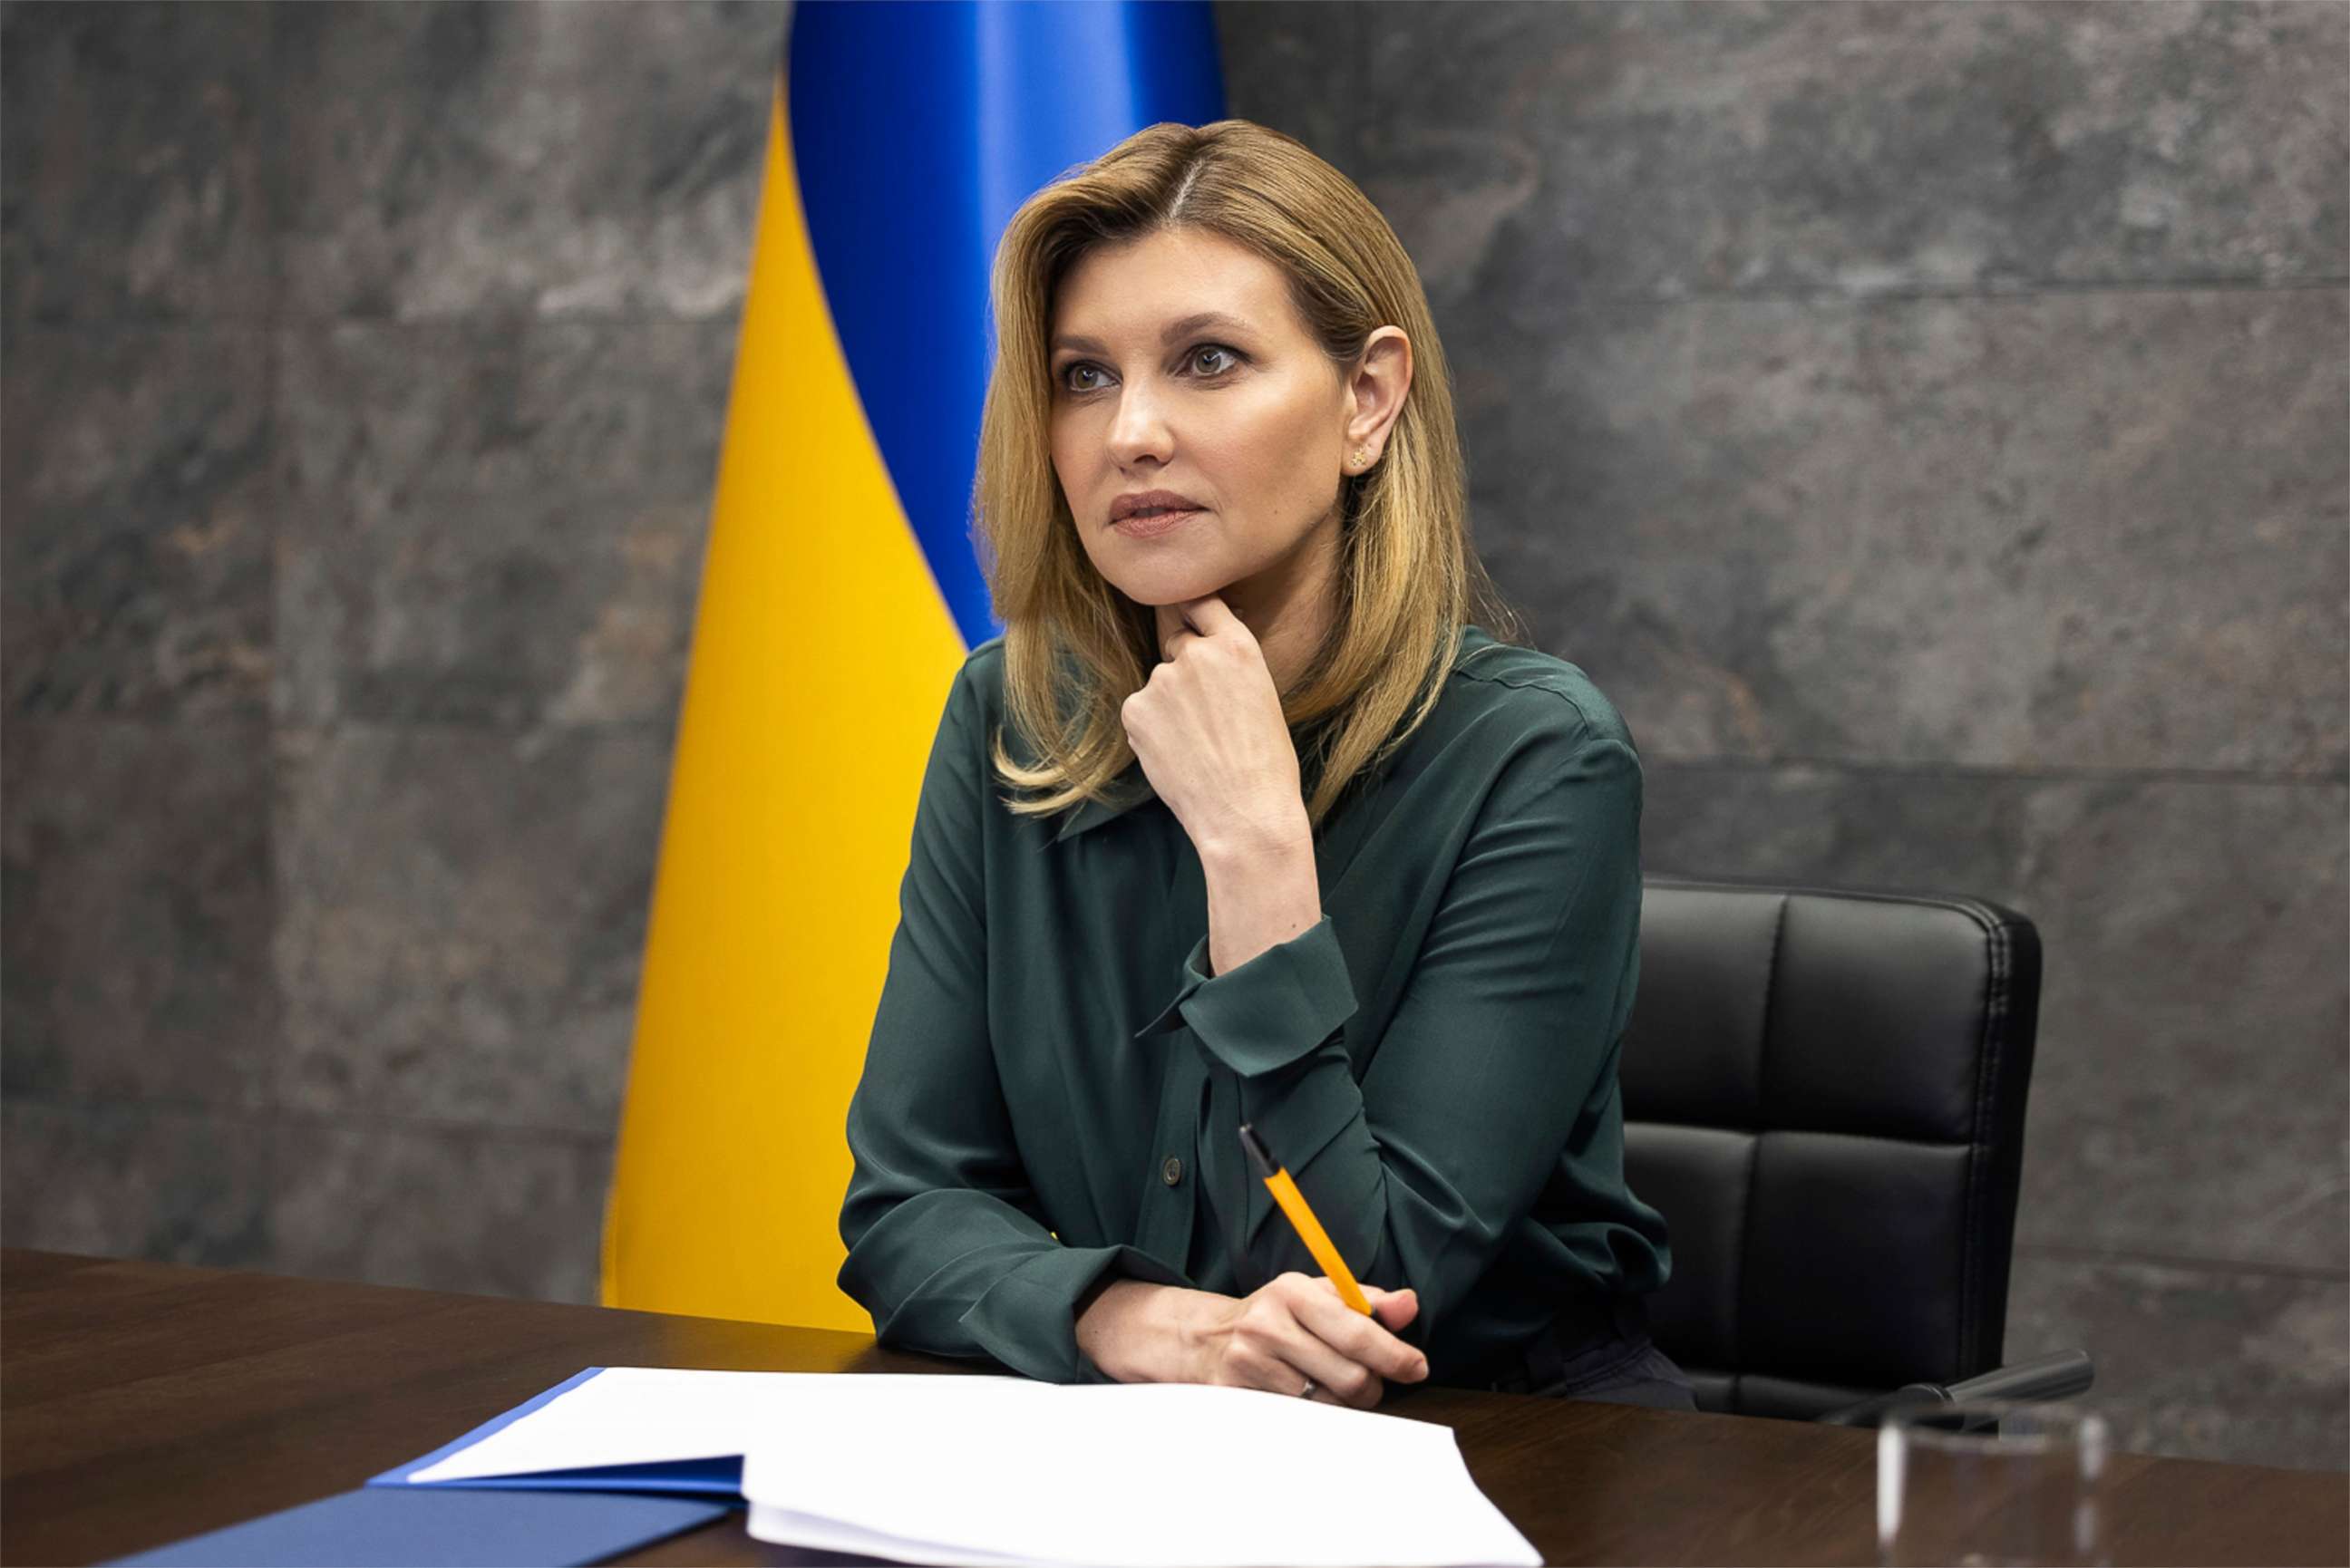 PHOTO: Ukrainian First Lady Olena Zelenska, holds a teleconference with Queen Mathilde of Belgium, to discuss the National Program of Mental Health and Psychosocial Support from the Mariinsky Palace, May 31, 2022, in Kyiv, Ukraine.